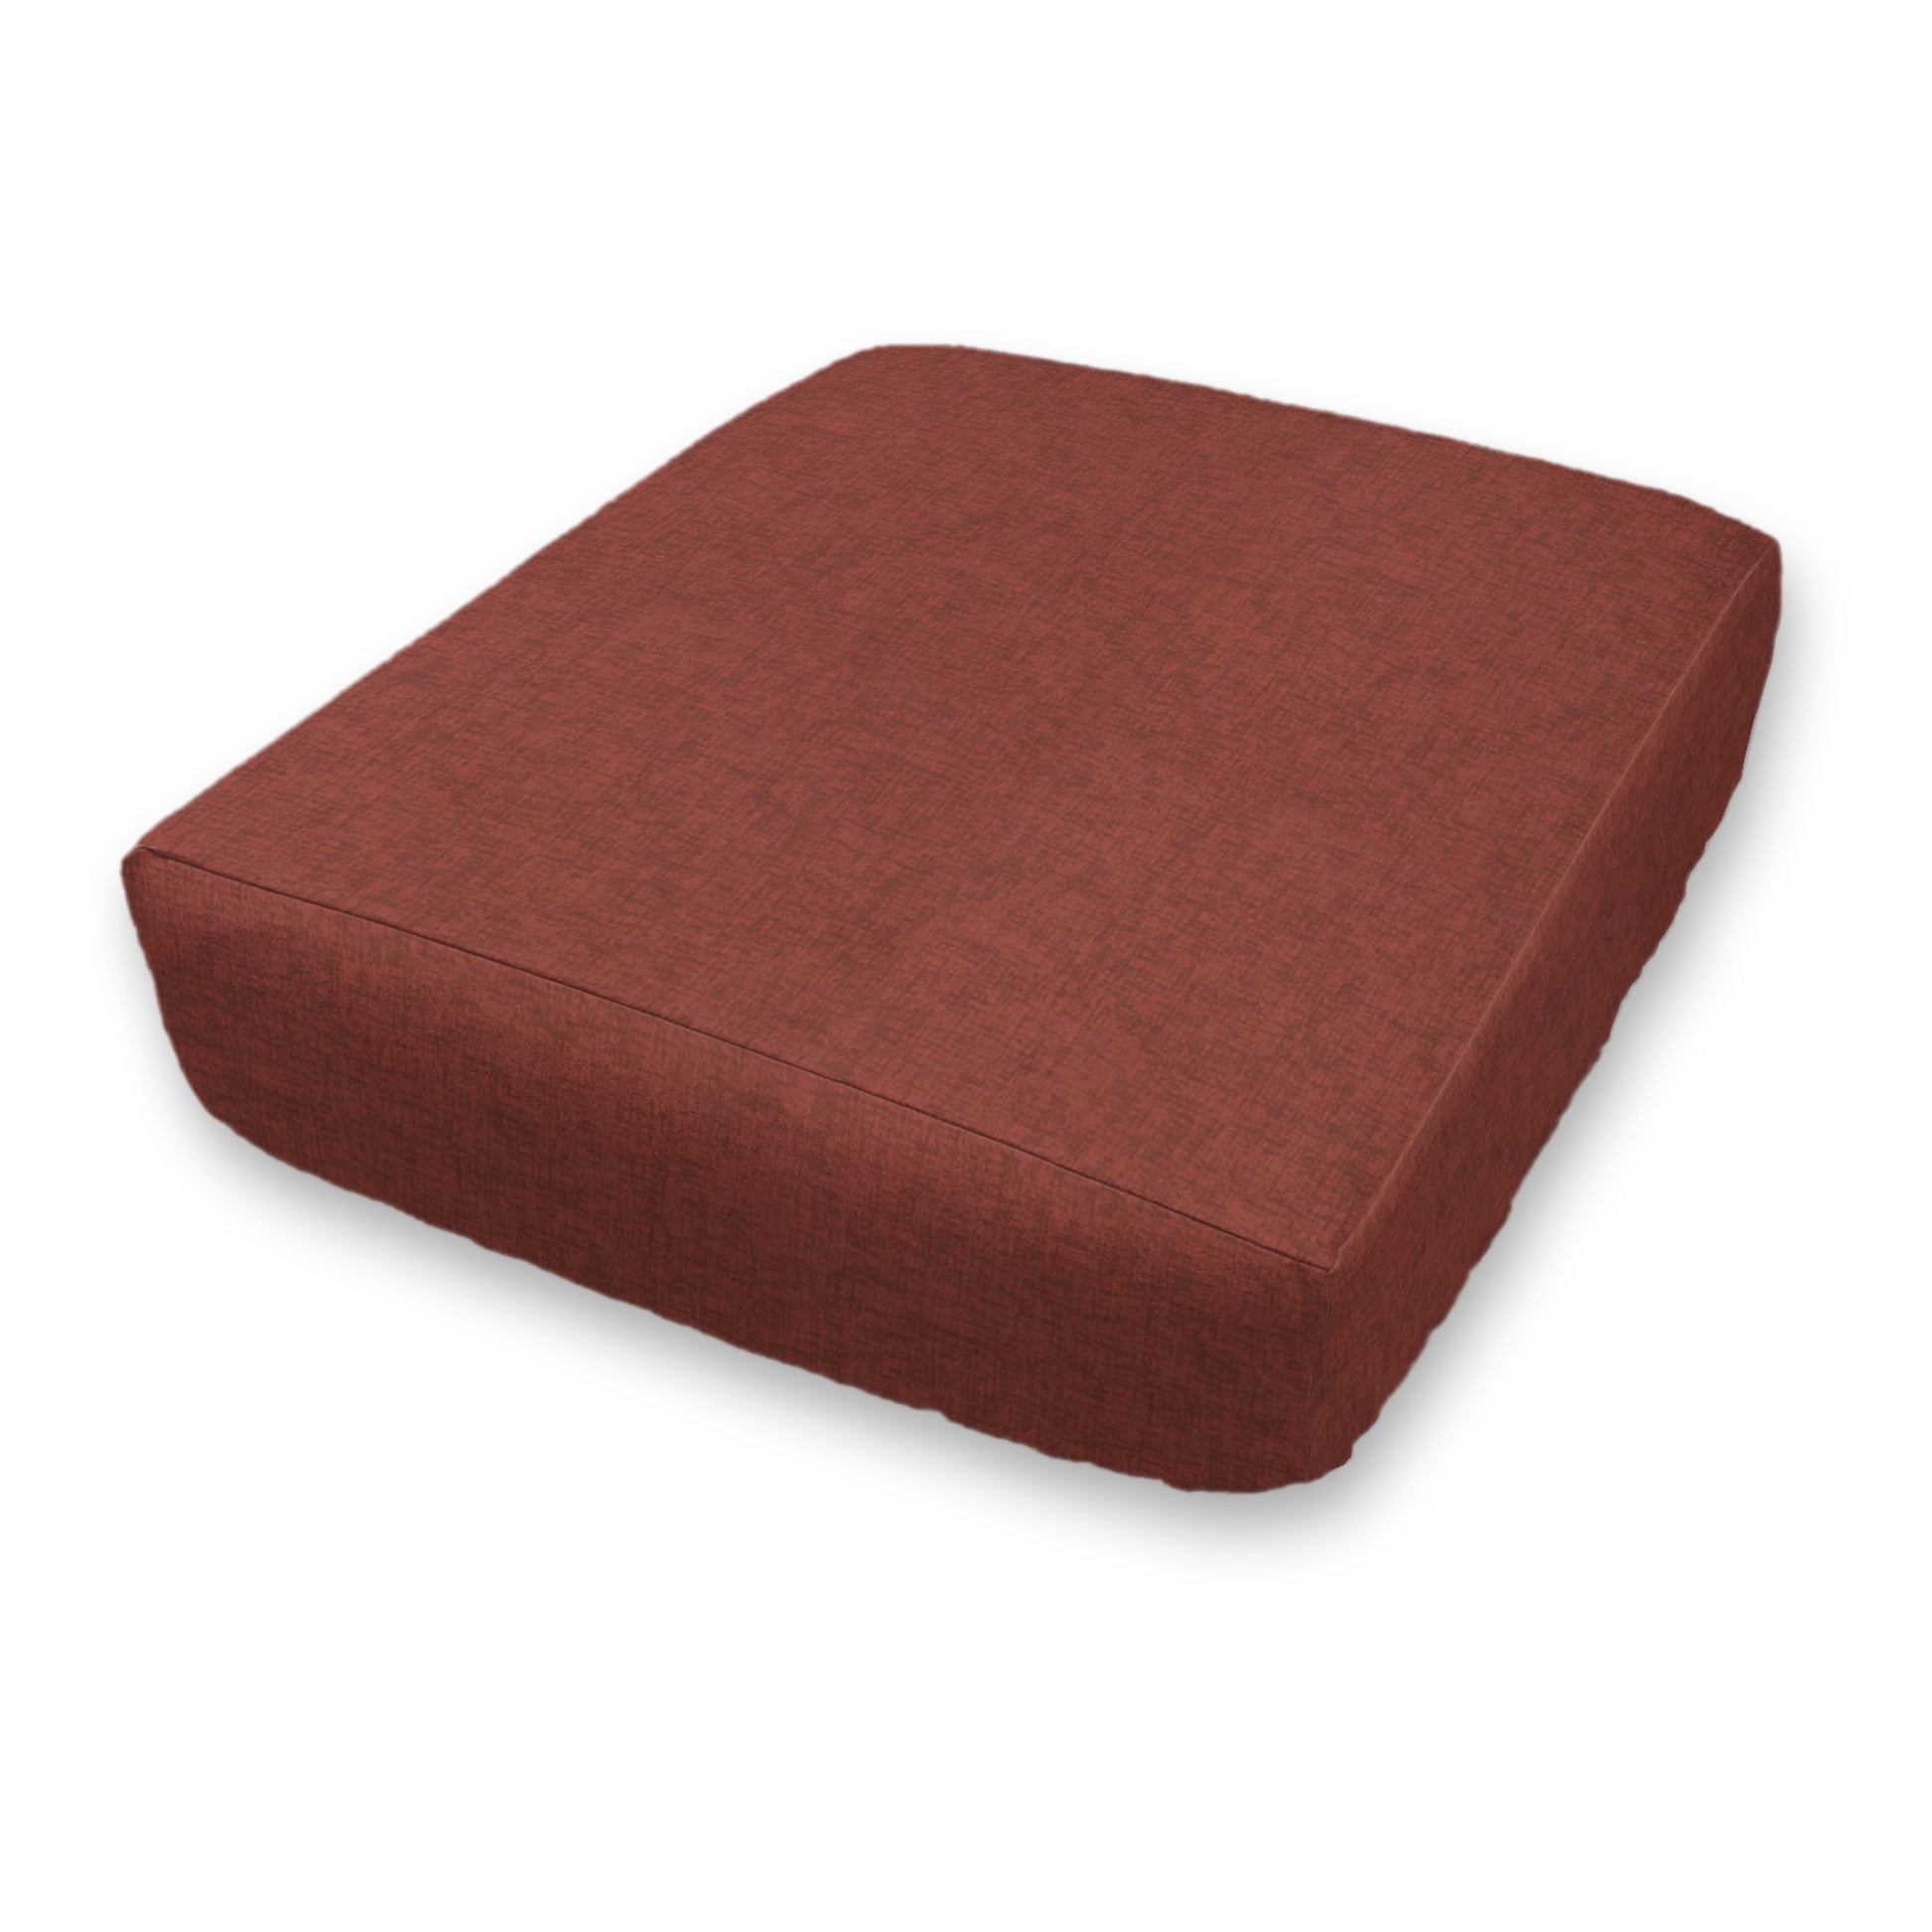 Custom Water Resistant Elastic Fitted & Protective Cushion Cover - Jackson solid